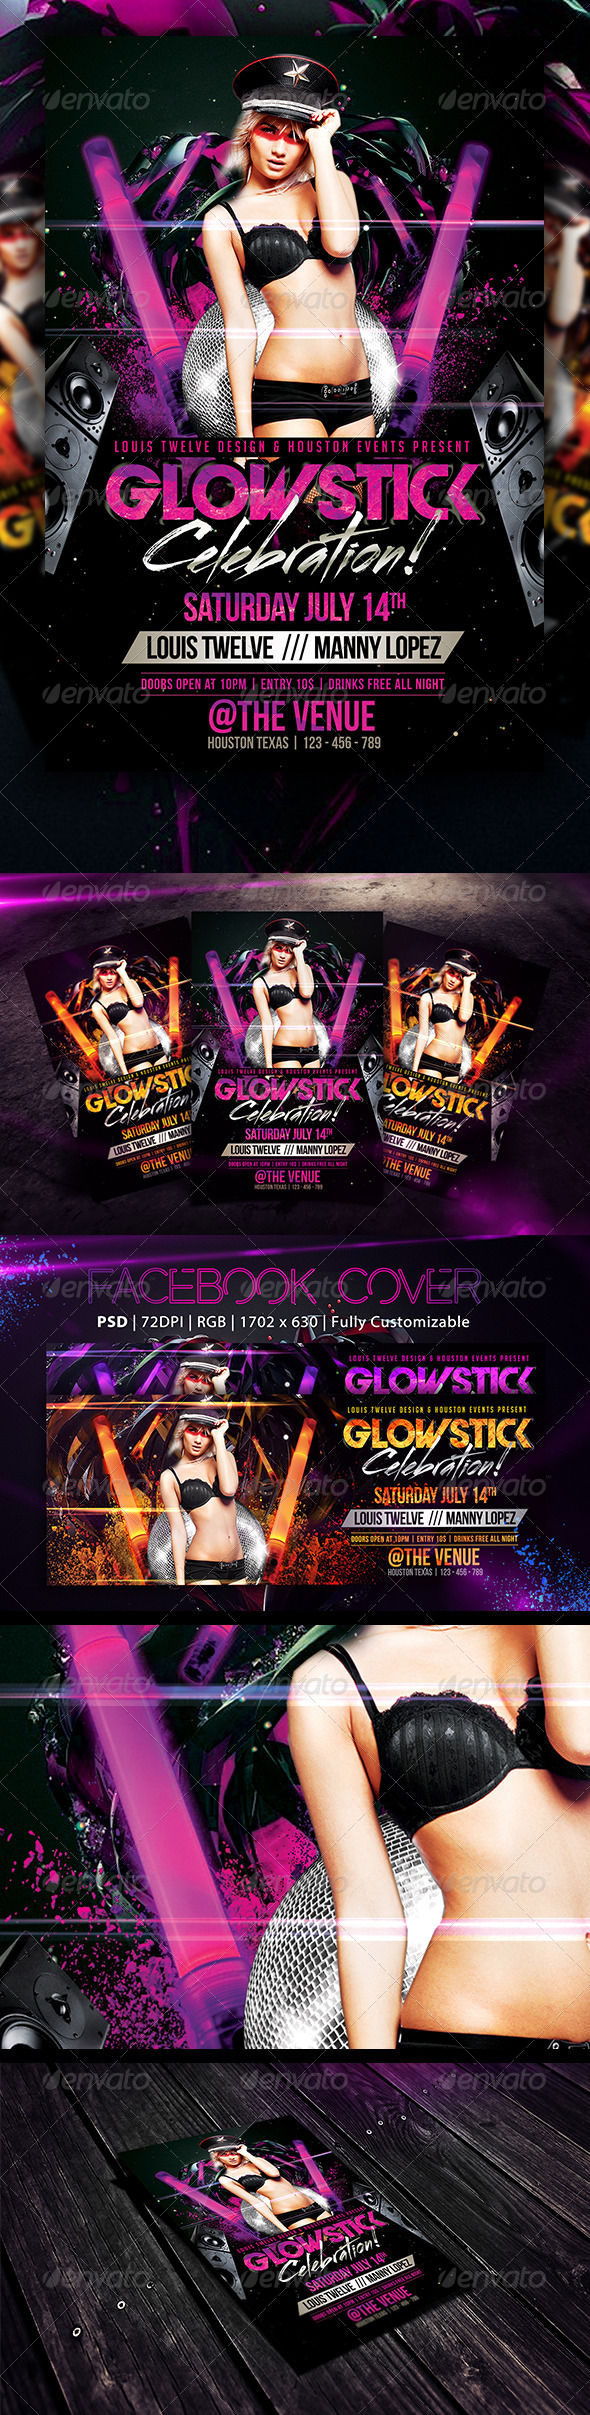 Glow Stick Party | Flyer + FB Cover